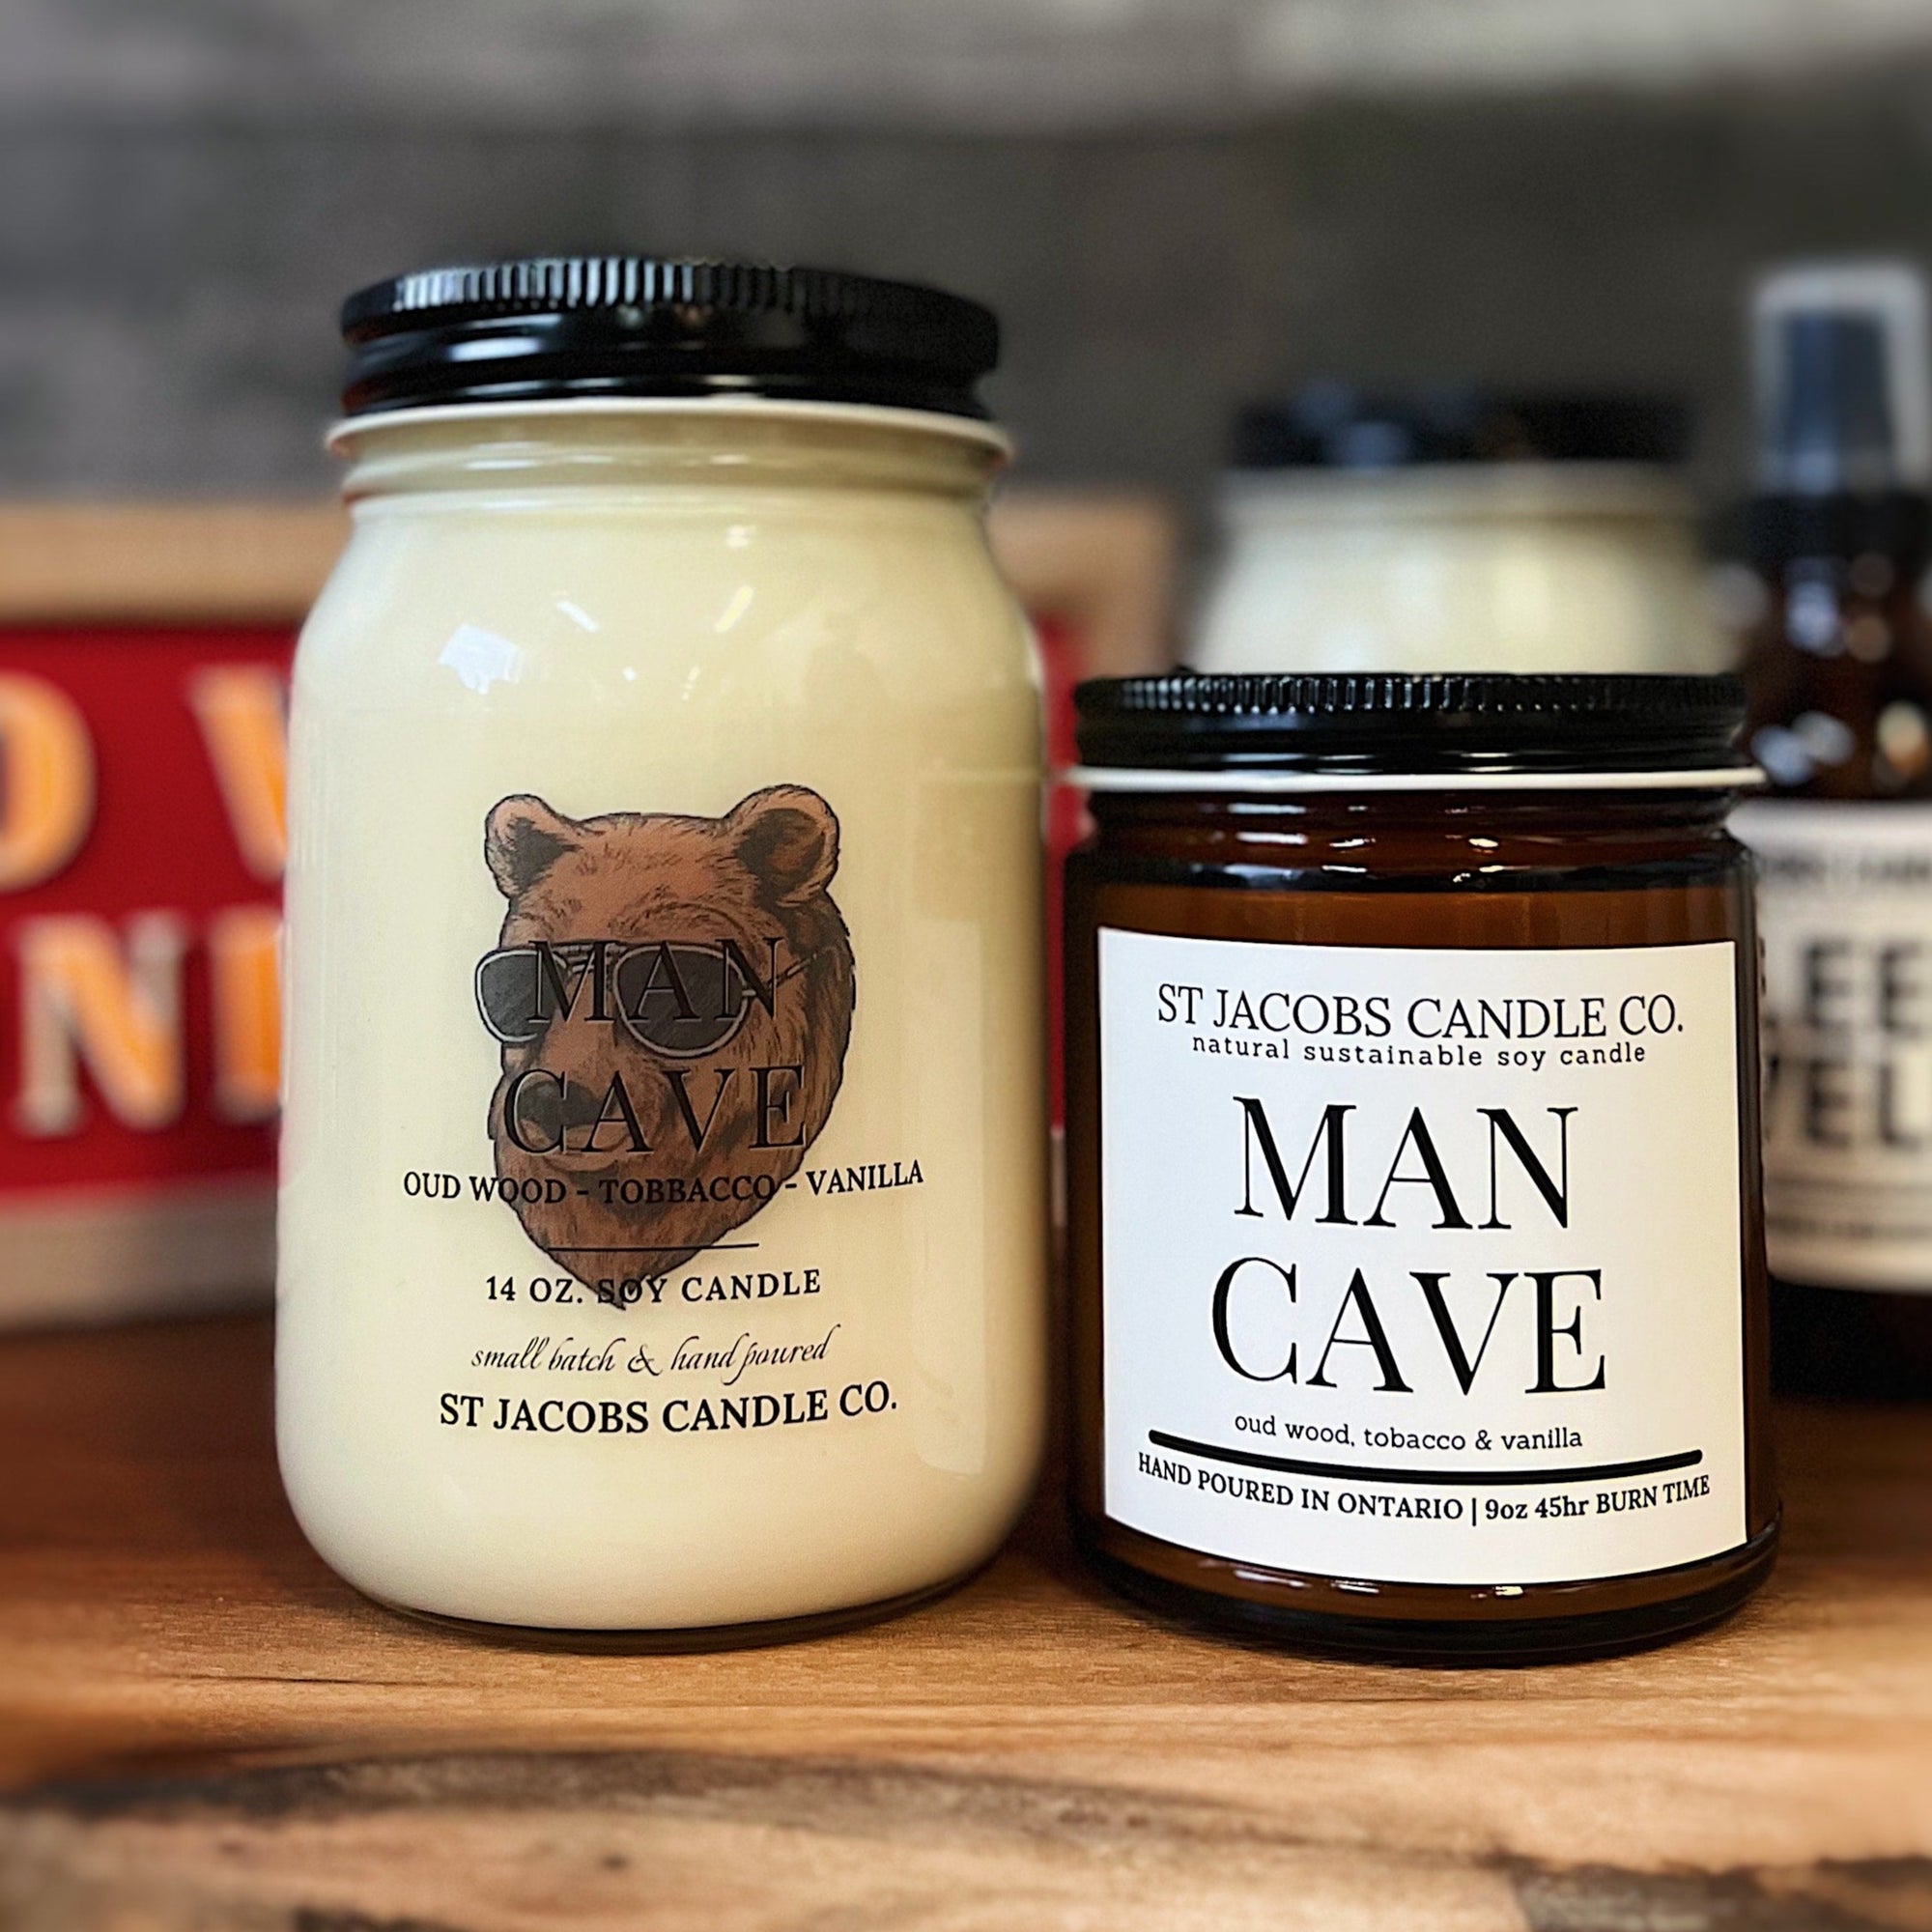 "MAN CAVE" Natural Soy Candle